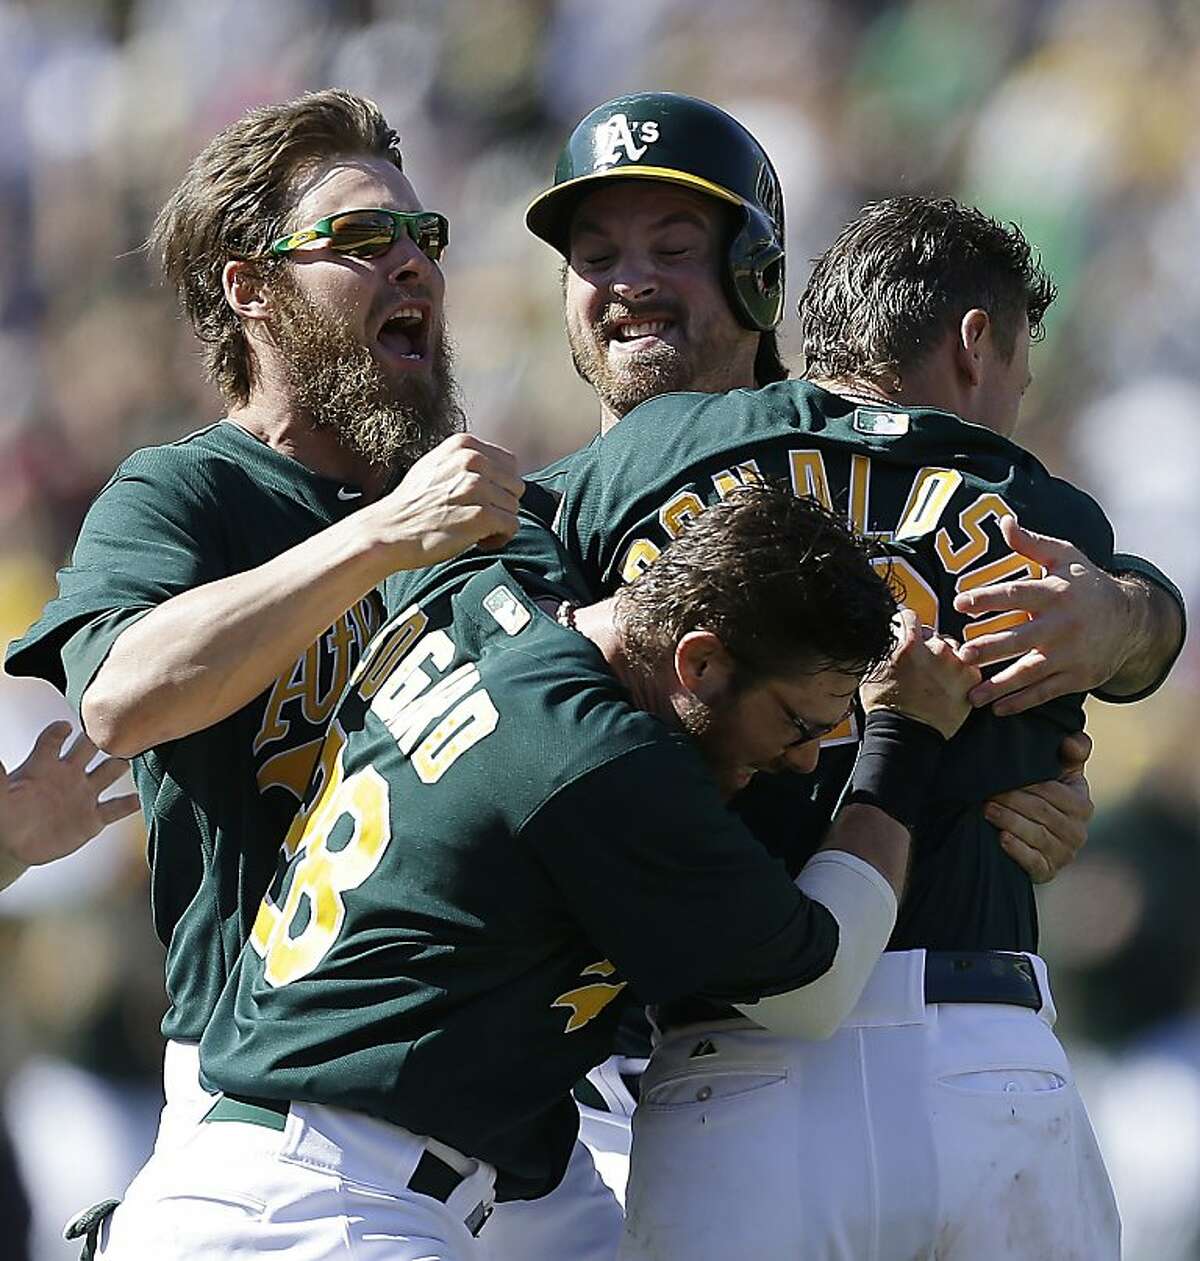 Oakland Athletics' Josh Donaldson, right, is mobbed by teammates, including Eric Sogard (28) and Josh Reddick, left, after Donaldson hit the game-winning single in the 11th inning of a baseball game against the Boston Red Sox on Sunday, July 14, 2013, in Oakland, Calif. The A's won 3-2. (AP Photo/Ben Margot)